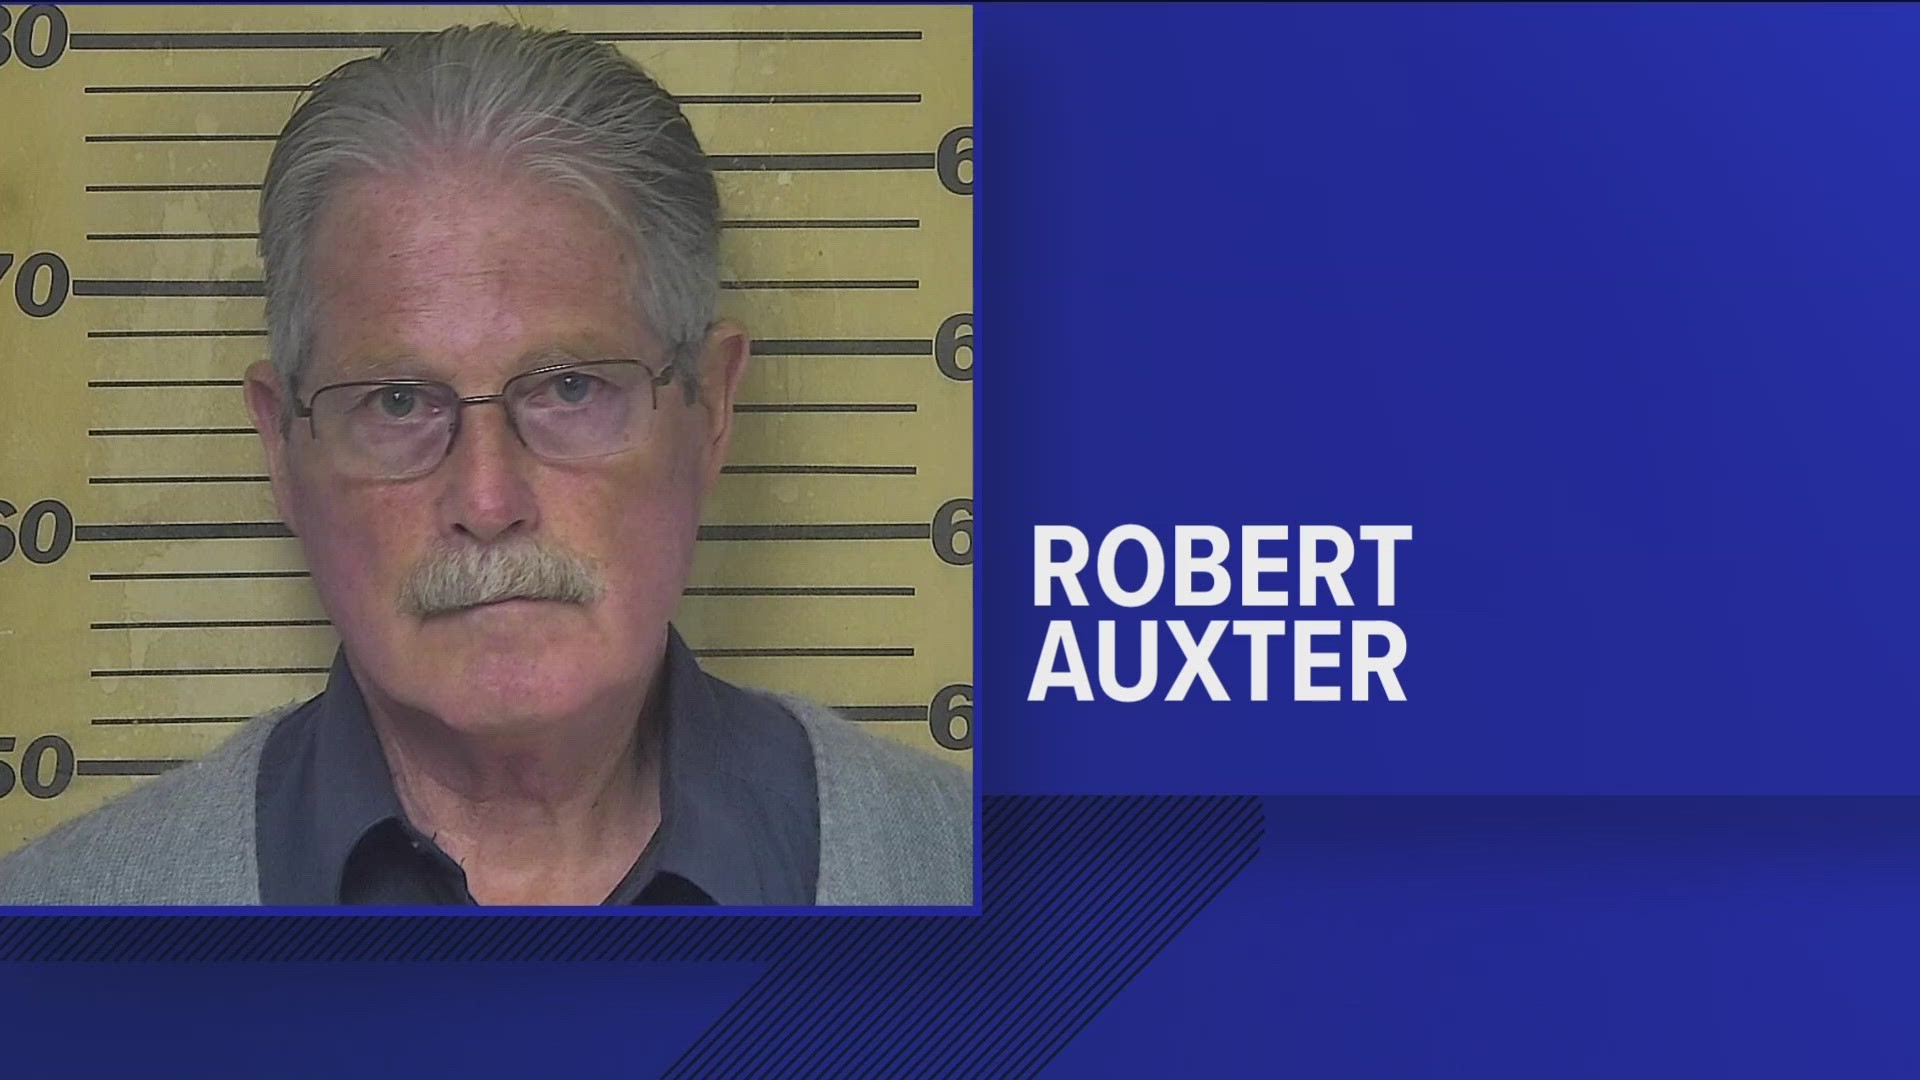 Robert Auxter served as pastor at Grace Lutheran Church in Monroe. He resigned prior to being charged and admitting to sex crimes involving a girl in northwest Ohio.